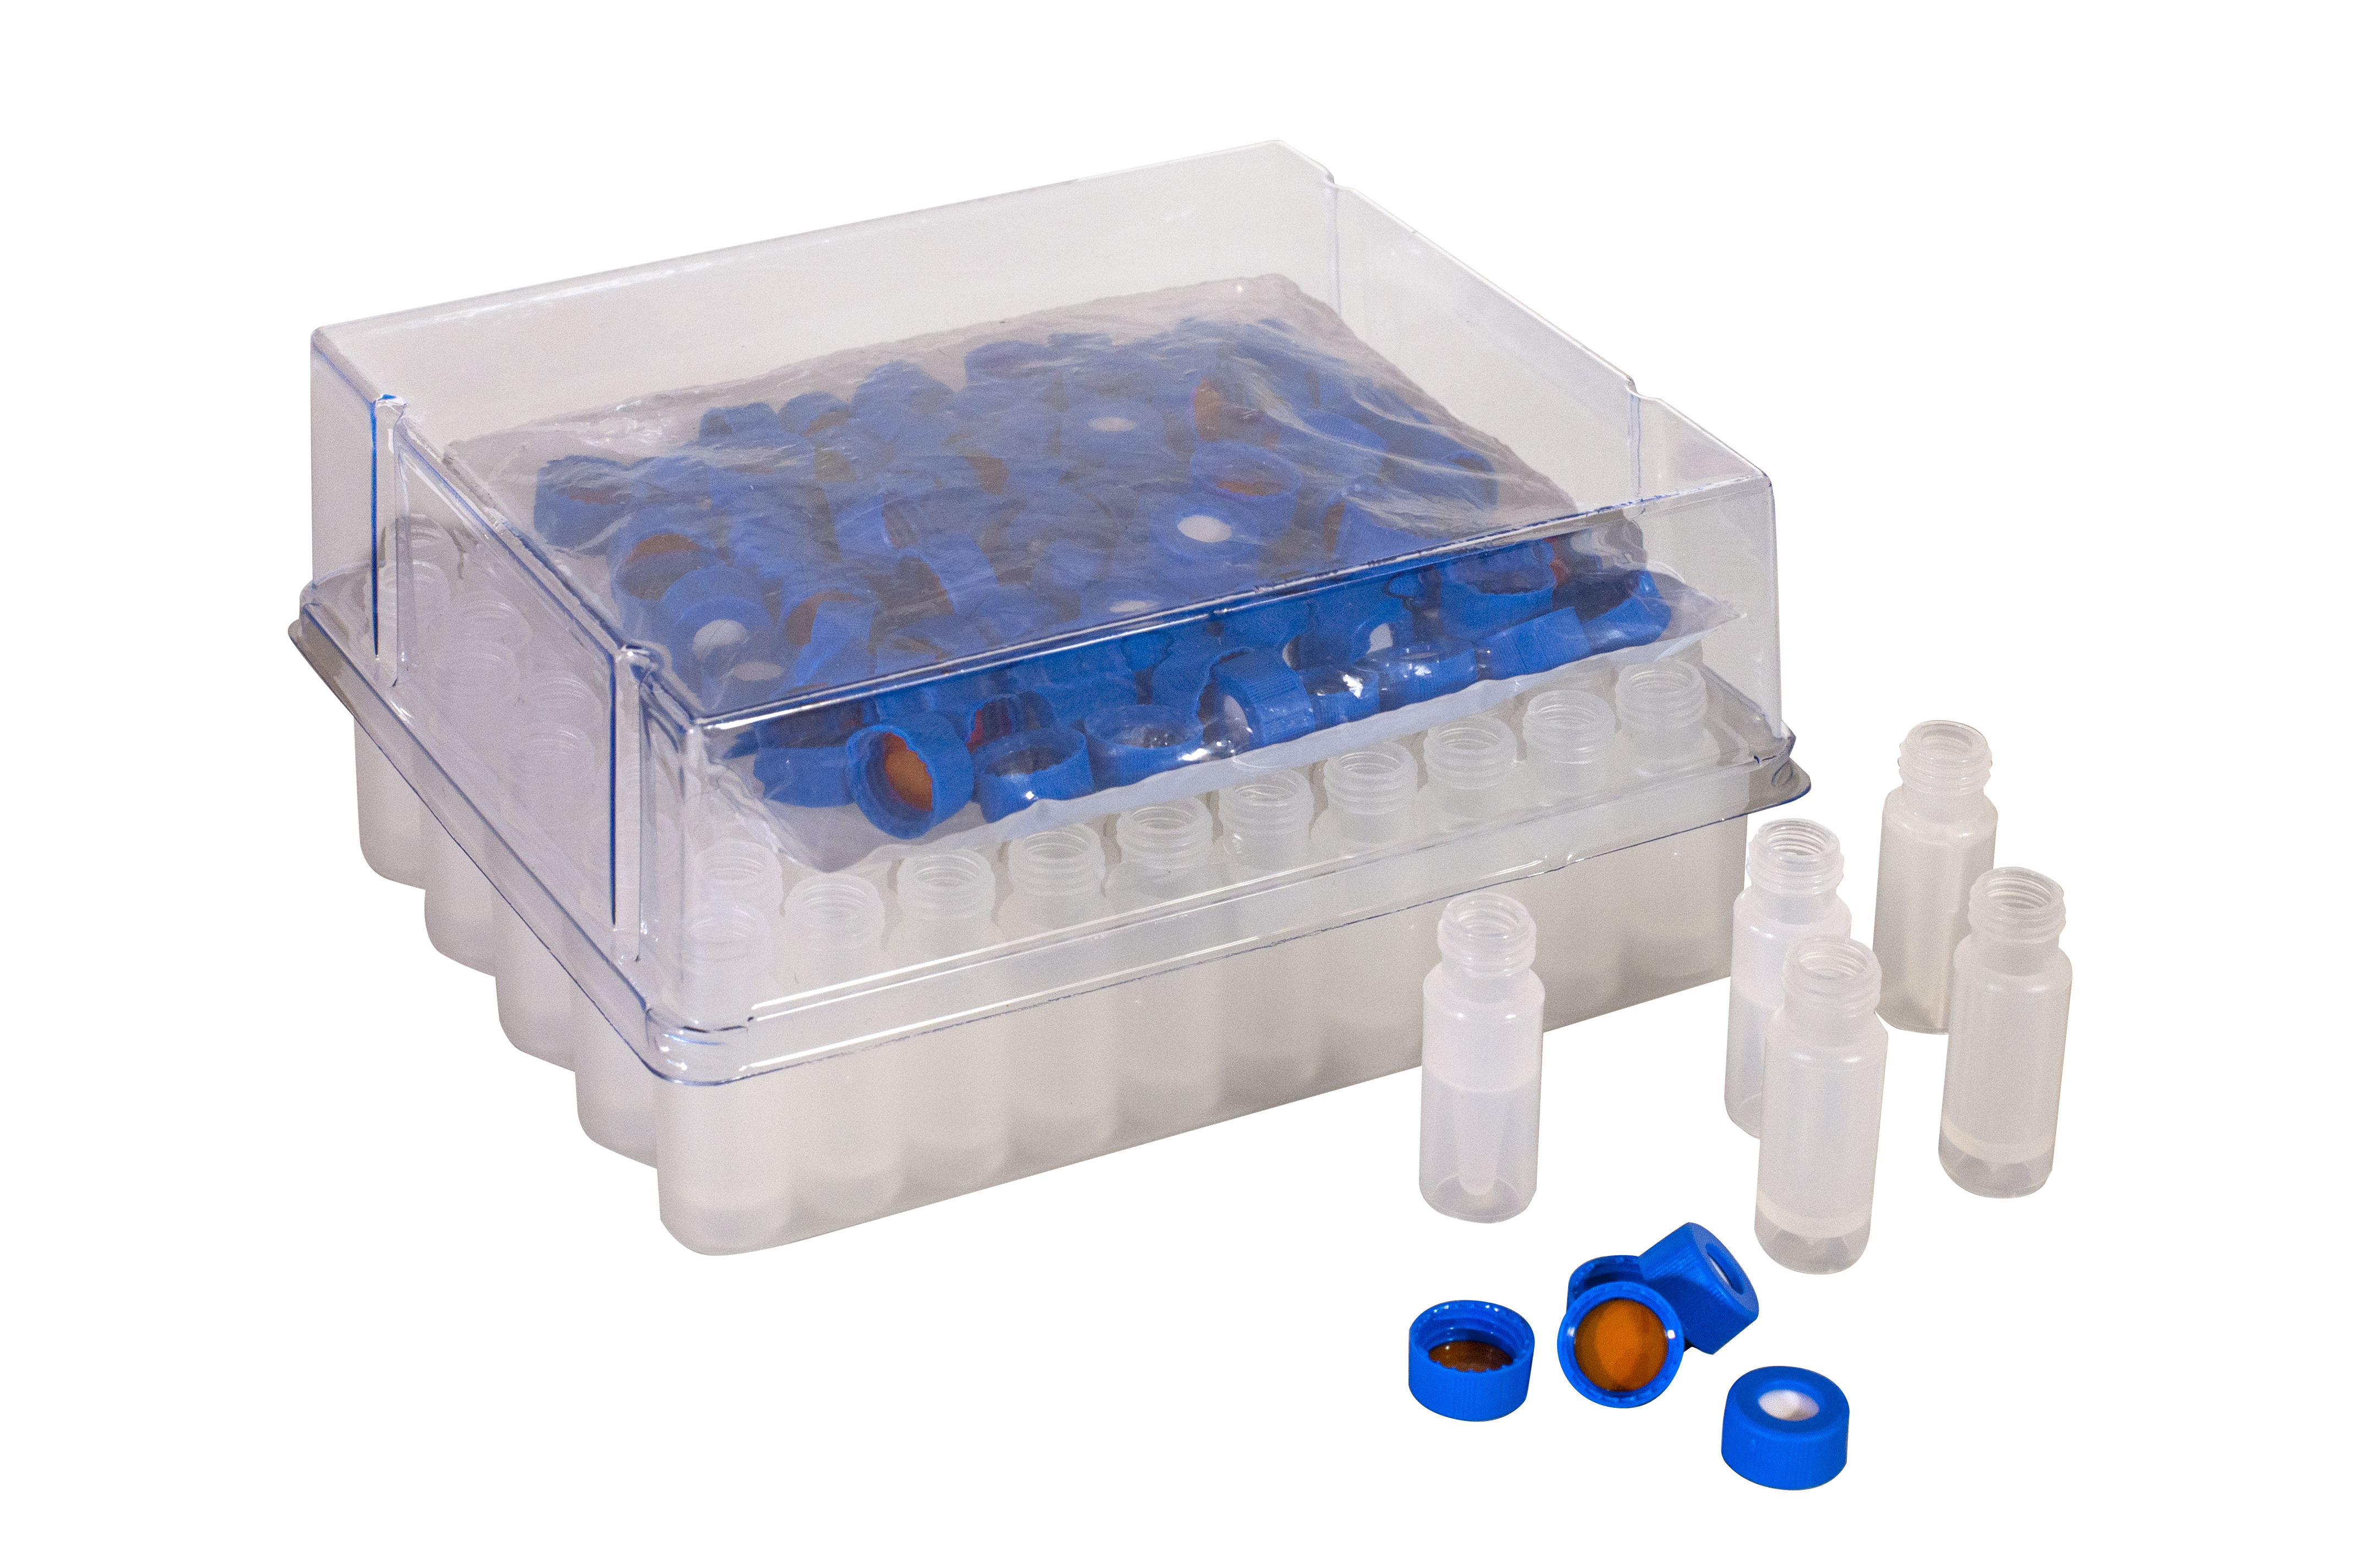 Explore Finneran Porvair Sciences' line of PFAS Convenience Kits, proudly made in the USA.  